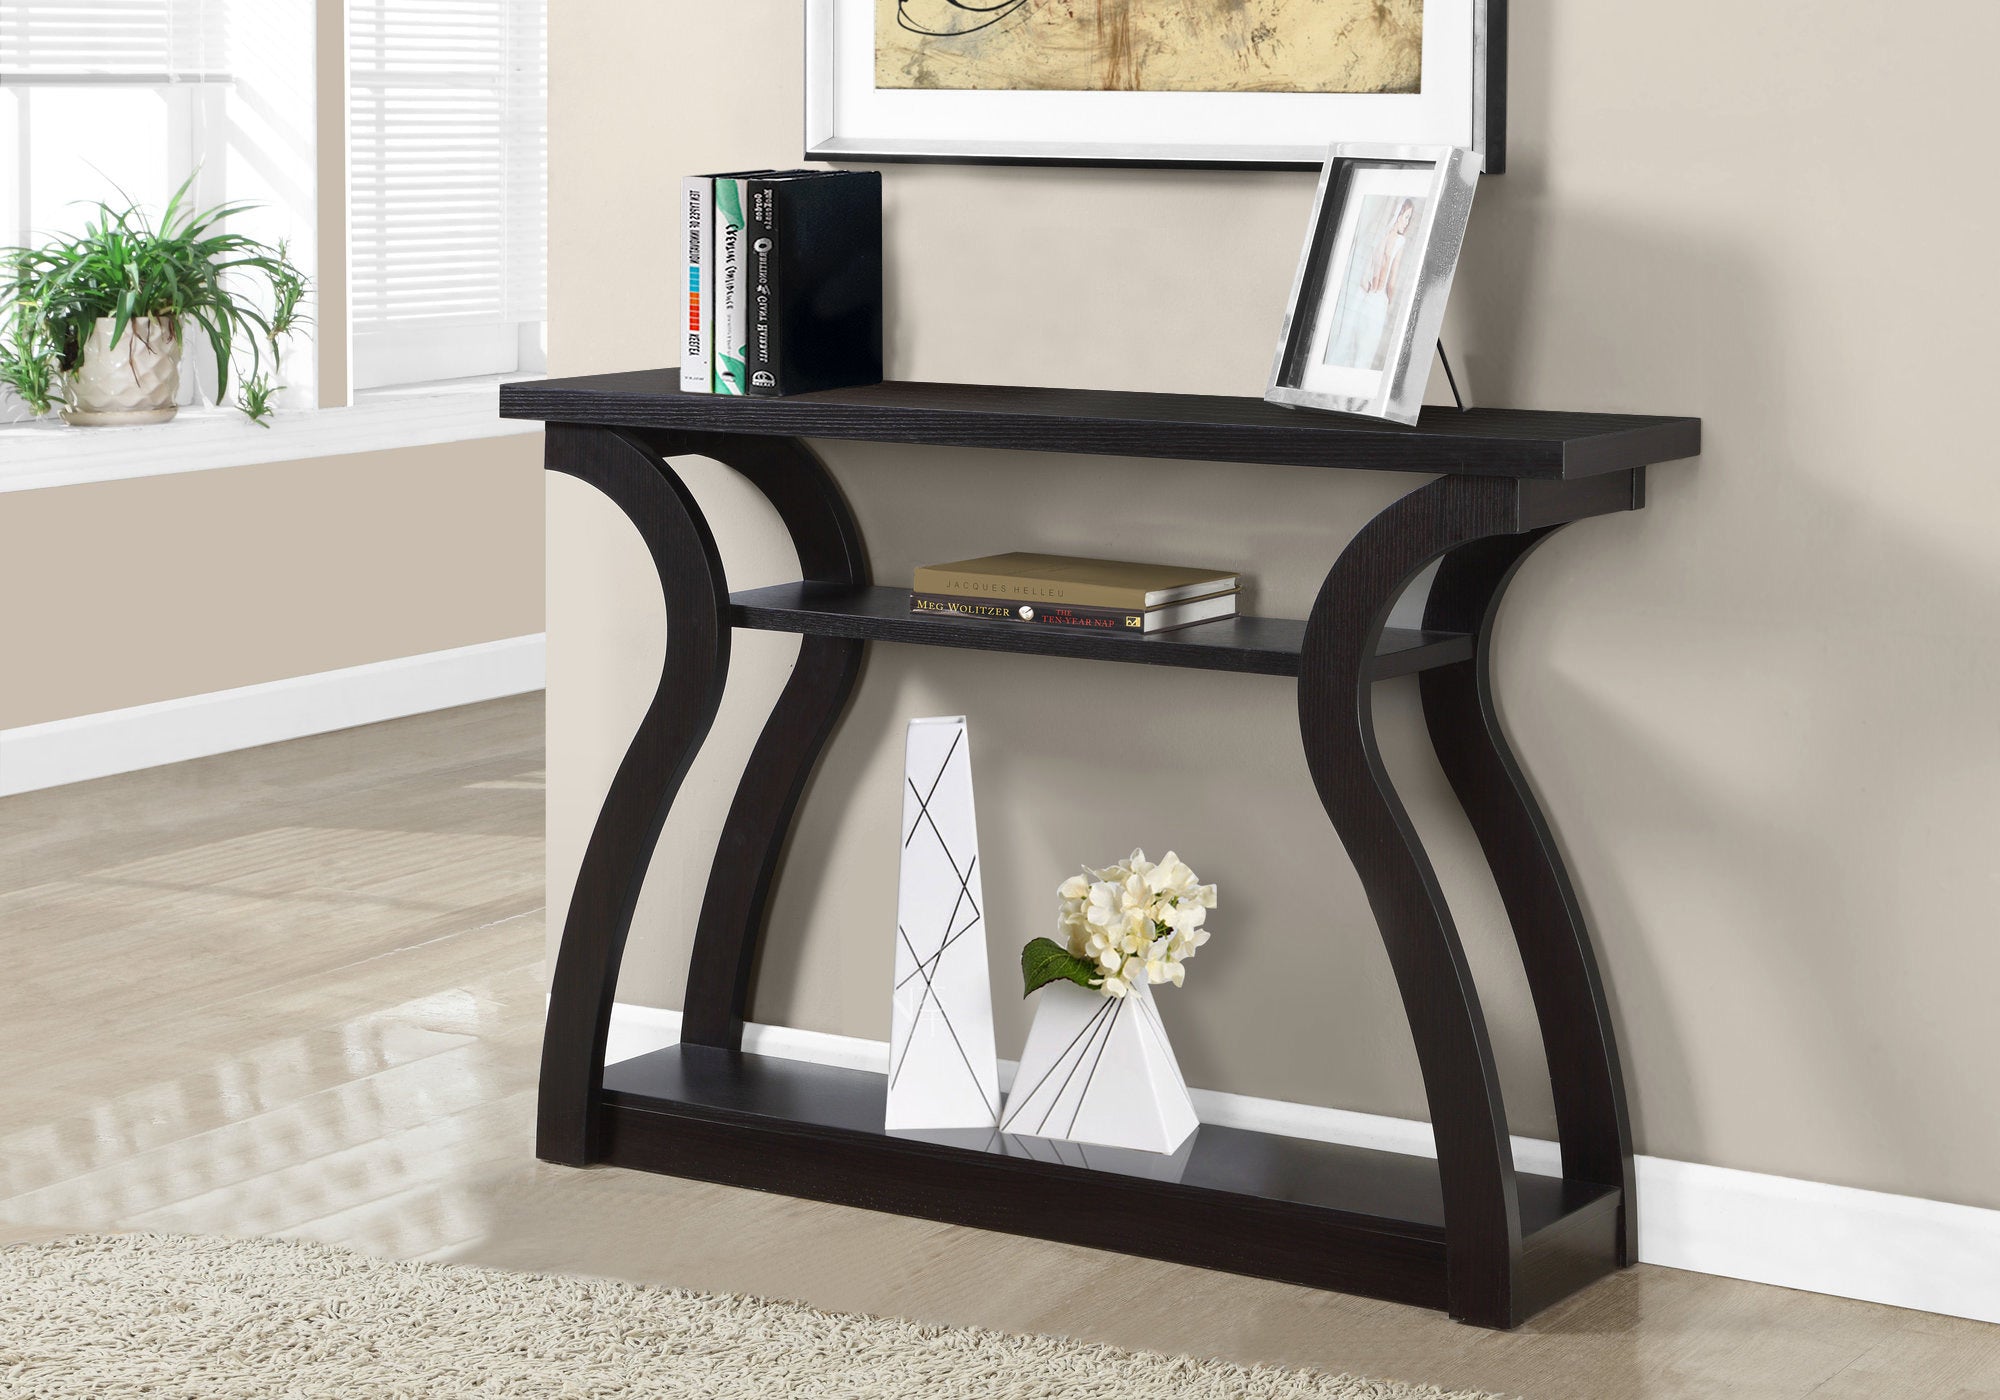 MN-222445    Accent Table, Console, Entryway, Narrow, Sofa, Living Room, Bedroom, Laminate, Dark Brown, Contemporary, Modern